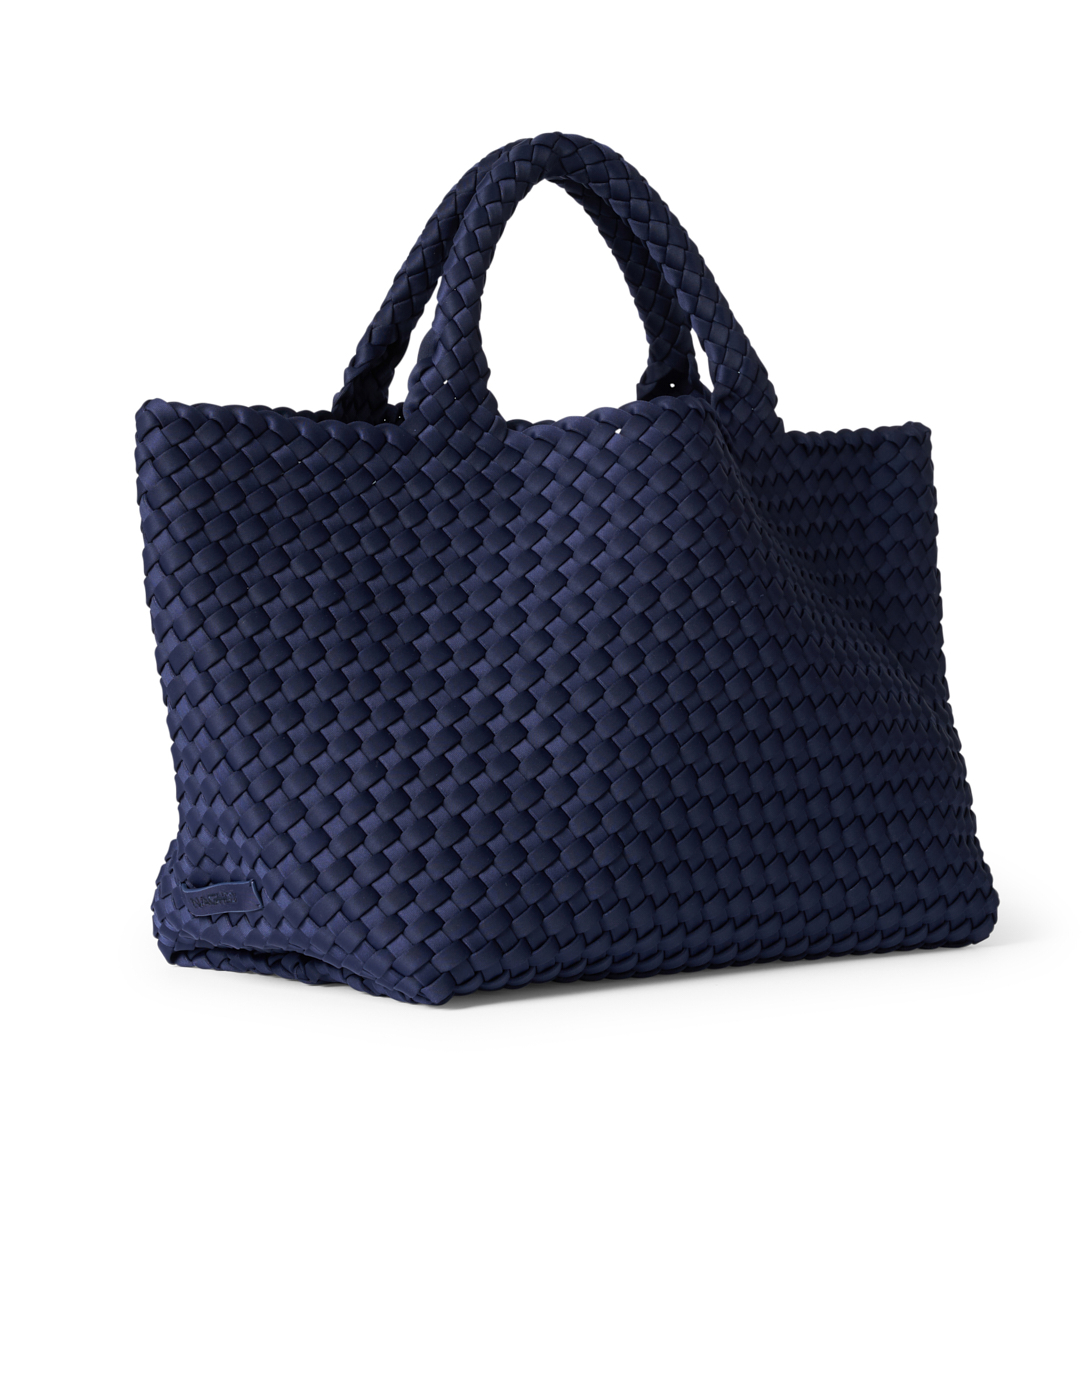 Printed Rectangular Woven Leather Tote Bag